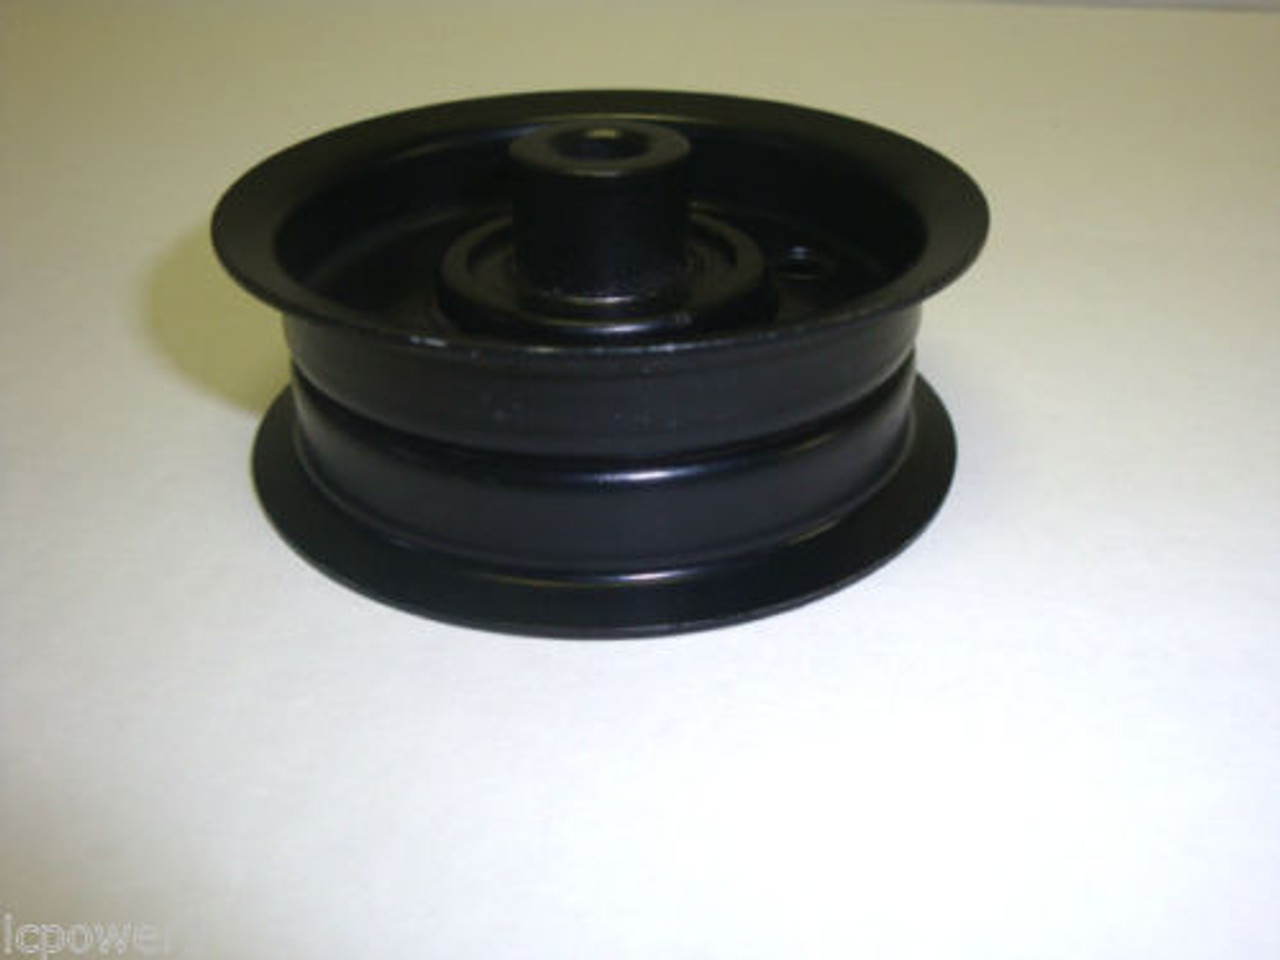 TORO  112-3687 Pulley-Idler, Flat 
Where Used: Part Number 112-3687
Model Name Diagram
13AP60RP544, LX500 Lawn Tractor, 2006 (SN 1A056B50000-) TRANSMISSION, BELT
AND PULLEY ASSEMBLY
13AP60RP744, LX500 Lawn Tractor, 2006 (SN 1A096B50000-) TRANSMISSION, BELT
AND PULLEY ASSEMBLY
13AX60RG544, LX420 Lawn Tractor, 2006 (SN 1L215B10000-) TRANSMISSION, BELT
AND PULLEY ASSEMBLY
13AX60RG744, LX420 Lawn Tractor, 2006 (SN 1L215B10000-) TRANSMISSION, BELT
AND PULLEY ASSEMBLY
13AX60RH544, LX460 Lawn Tractor, 2006 (SN 1A056B50000-) TRANSMISSION, BELT
AND PULLEY ASSEMBLY
13AX60RH744, LX460 Lawn Tractor, 2006 (SN 1A056B50000-) TRANSMISSION, BELT
AND PULLEY ASSEMBLY
13BX60RG544, LX425 Lawn Tractor, 2007 (SN 1A087H10172-1E237H10144) TRANSMISSION, BELT
AND PULLEY ASSEMBLY
13BX60RG544, LX425 Lawn Tractor, 2007 (SN 1E237H10145-) TRANSMISSION, BELT
AND PULLEY ASSEMBLY
13BX60RG744, LX425 Lawn Tractor, 2007 (SN 1A087H10172-1C307H10417) TRANSMISSION, BELT
AND PULLEY ASSEMBLY
13BX60RG744, LX425 Lawn Tractor, 2007 (SN 1C307H10418-) TRANSMISSION, BELT
AND PULLEY ASSEMBLY
13BX60RG748, LX425 Lawn Tractor, 2007 (SN 1A087H10172-1E087H10250) TRANSMISSION, BELT
AND PULLEY ASSEMBLY
13BX60RG748, LX425 Lawn Tractor, 2007 (SN 1E087H10251-) TRANSMISSION, BELT
AND PULLEY ASSEMBLY
190-032-101, 42in Two-Stage Snowthrower, 2006 (SN 260000001-260999999) SPINDLE AND BELT
ASSEMBLY
